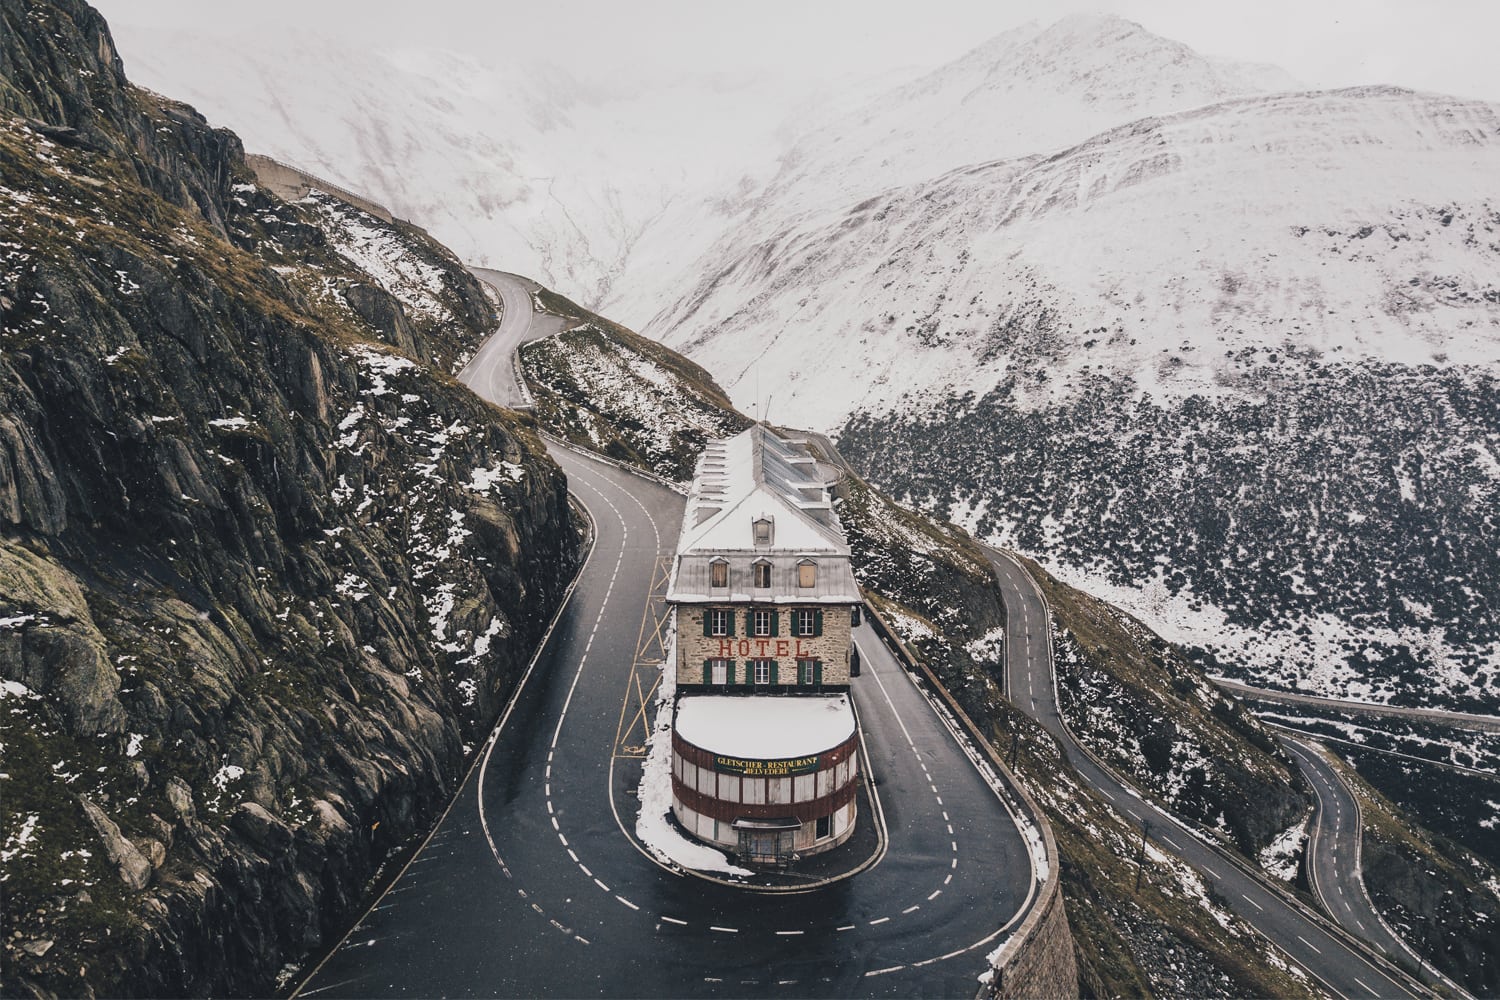 Analyses can attempt to determine which loyalty programs are the most successful, but the road to true customer loyalty is not a straightforward path (Furka Pass, Switzerland).